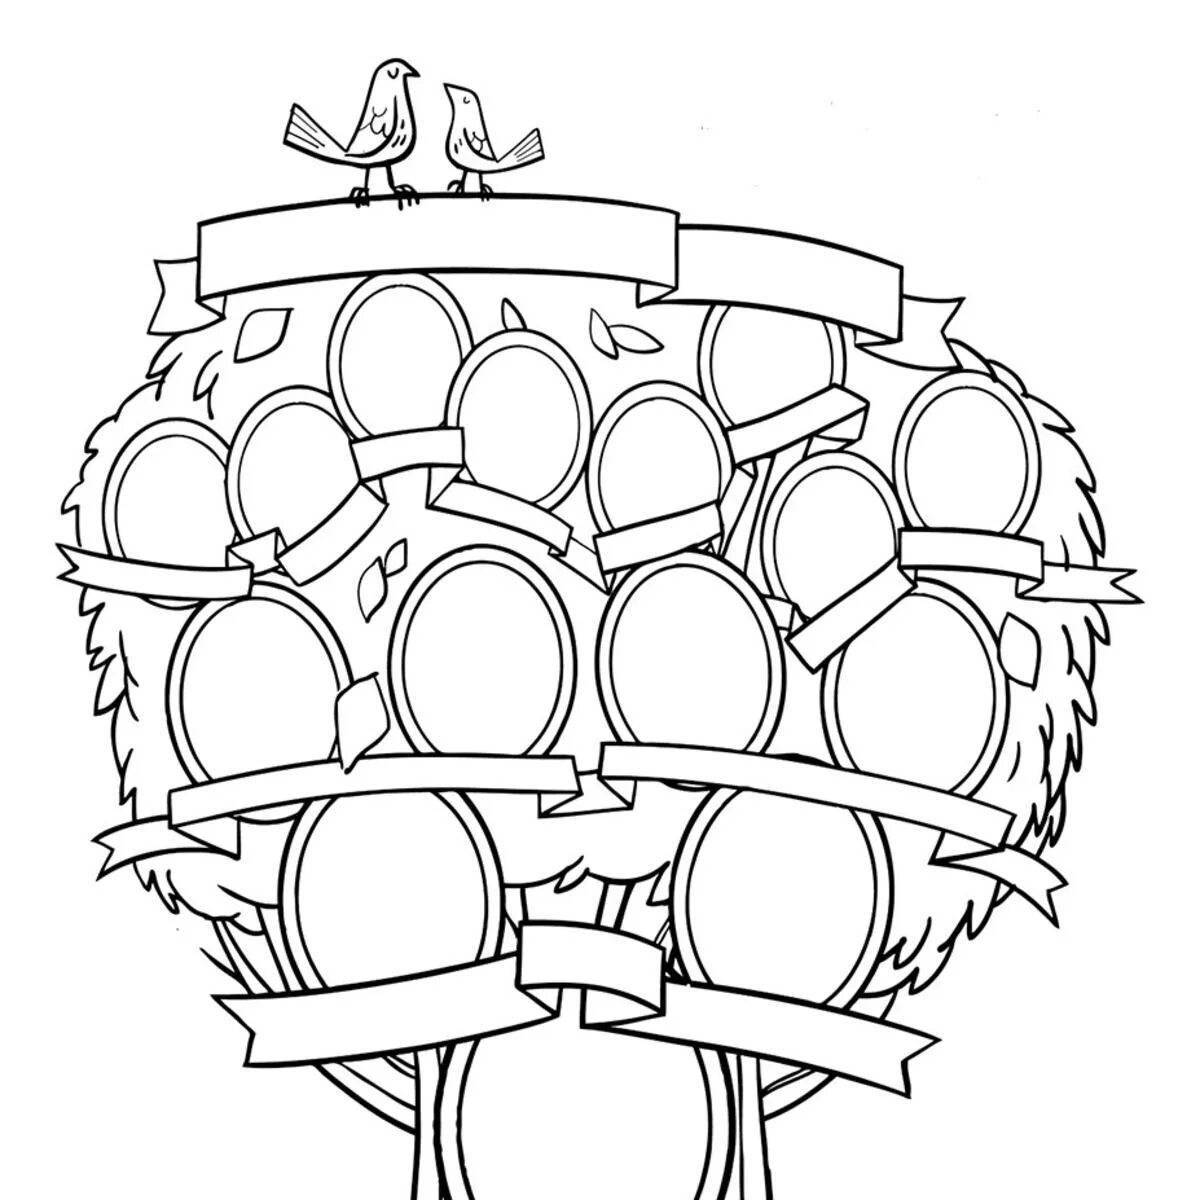 A fascinating tree coloring page template